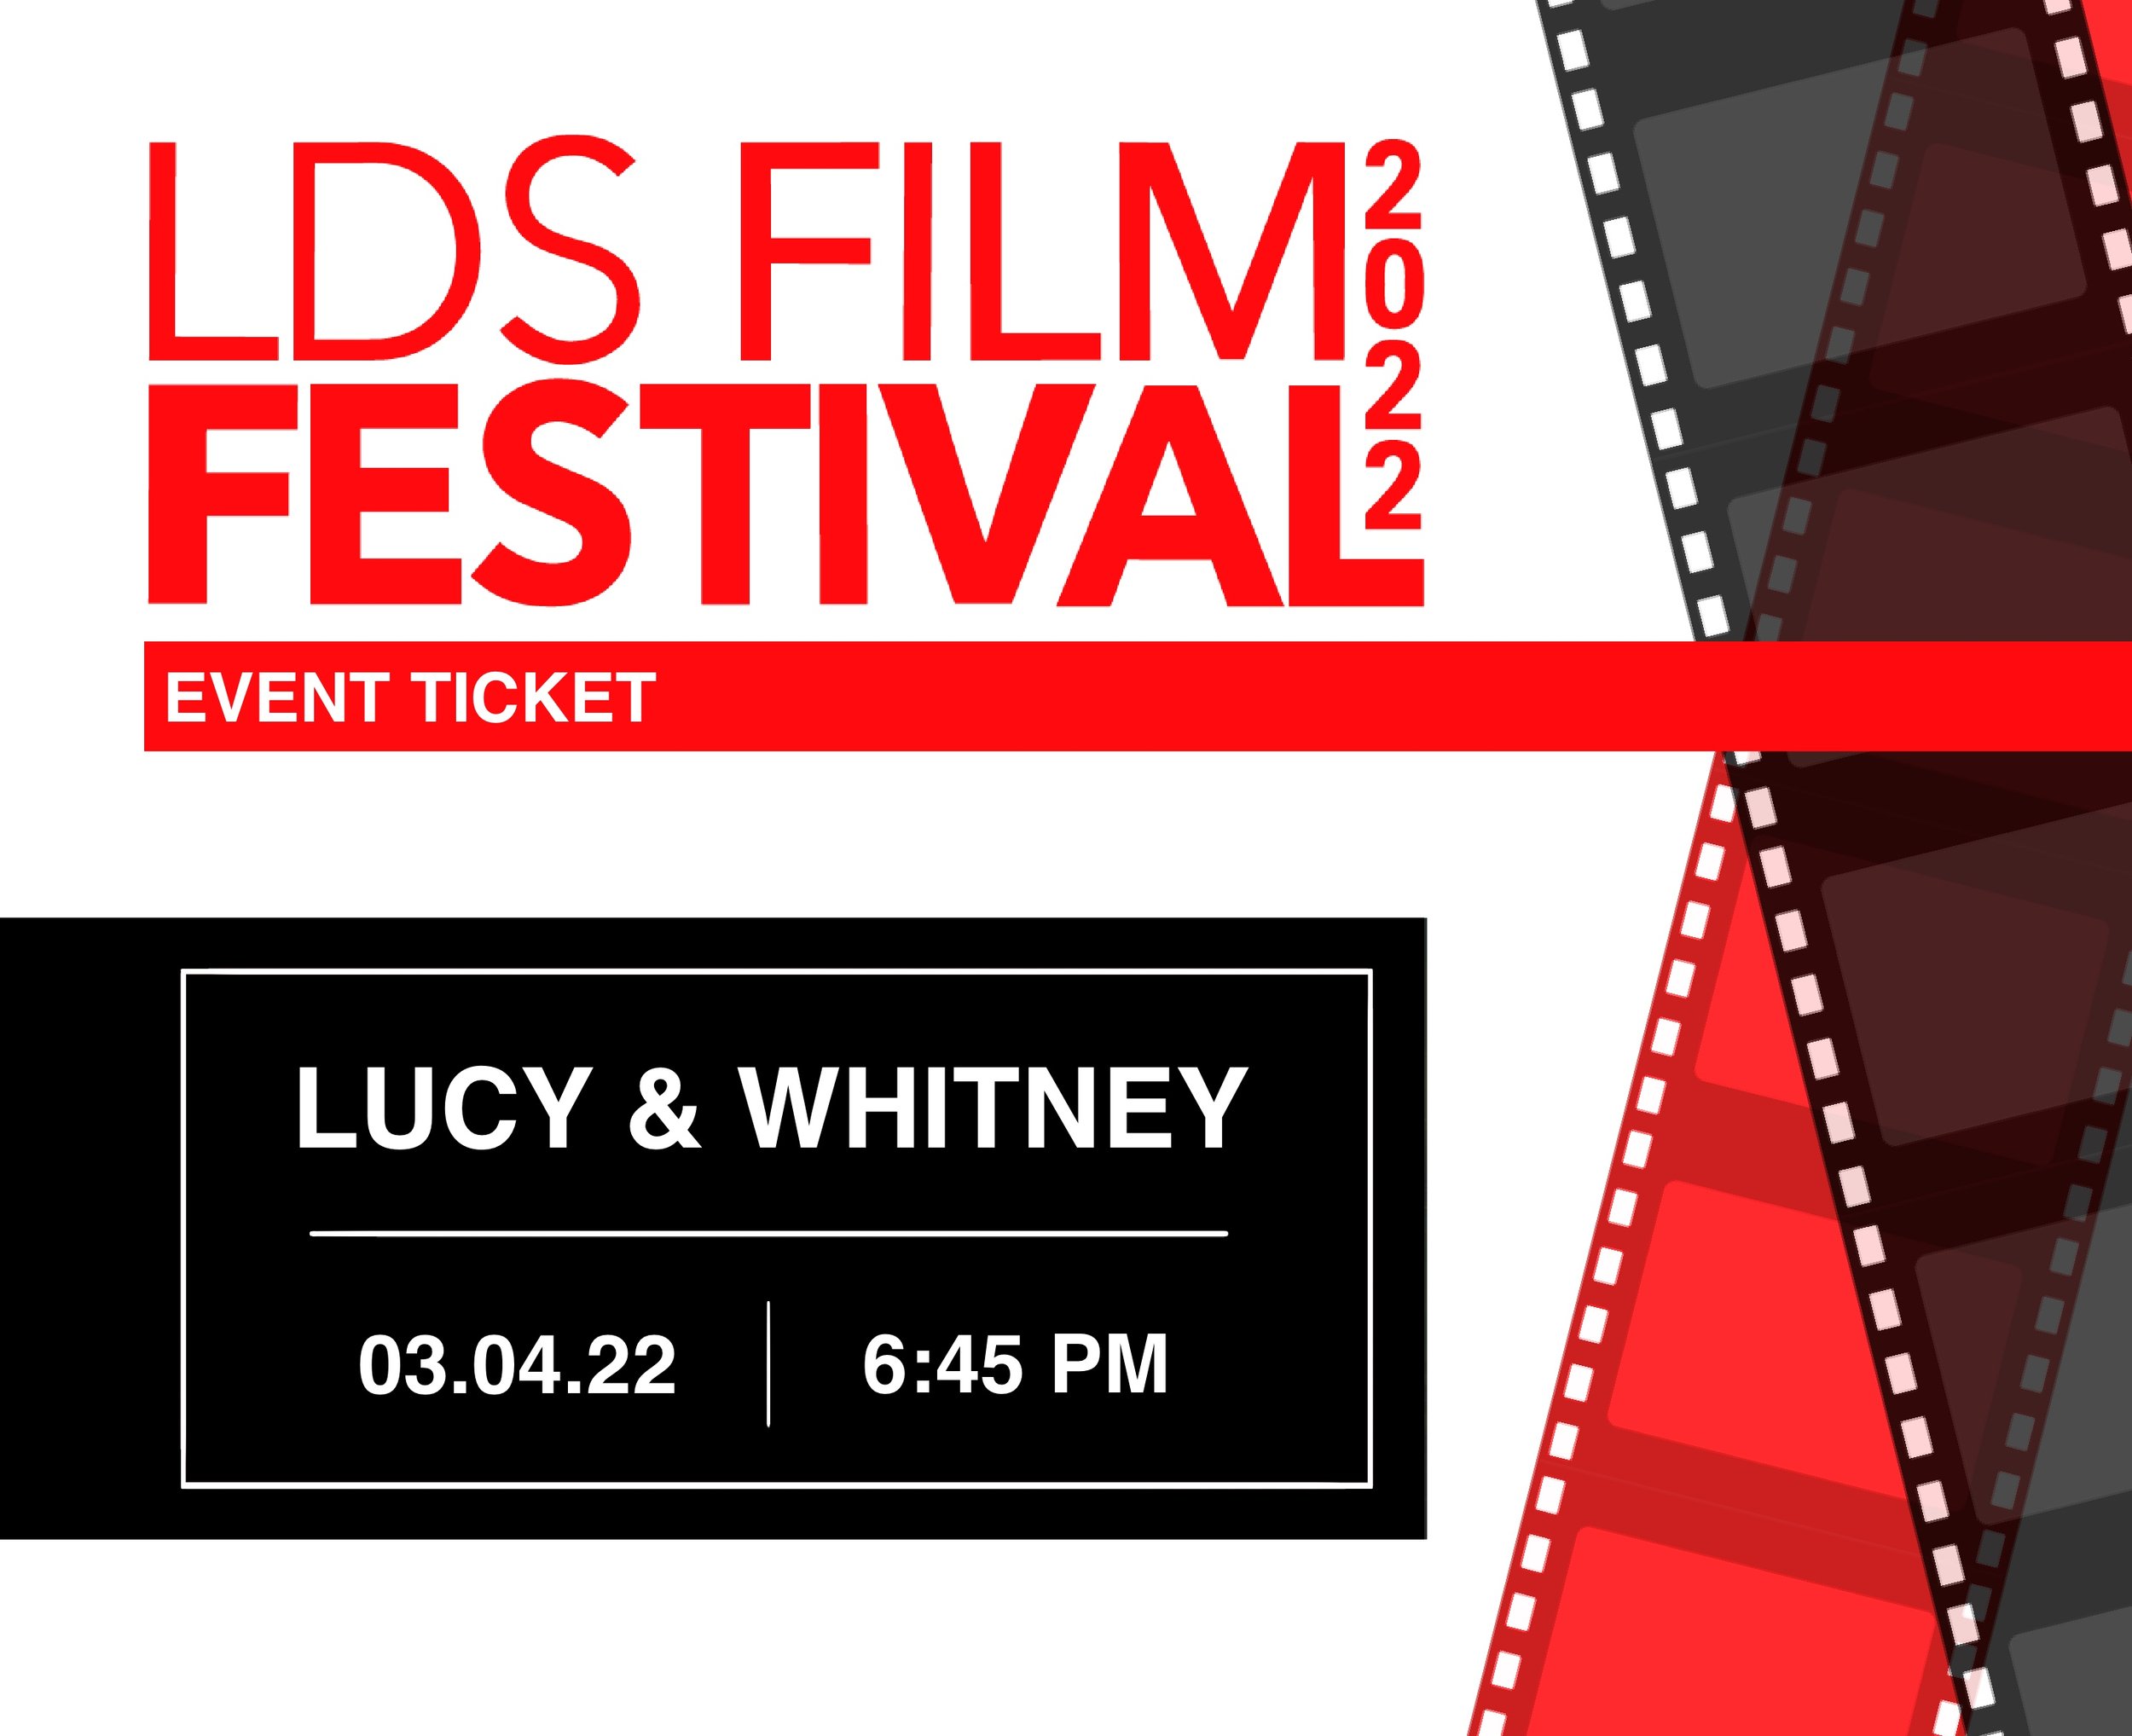 Lucy & Whitney03.04.22 | 6:45 PM Showhouse II Theatre - In Washington State, two sisters explore their relationship after the older sister is married, in the context of their Mormon faith.Q&A with filmmakers